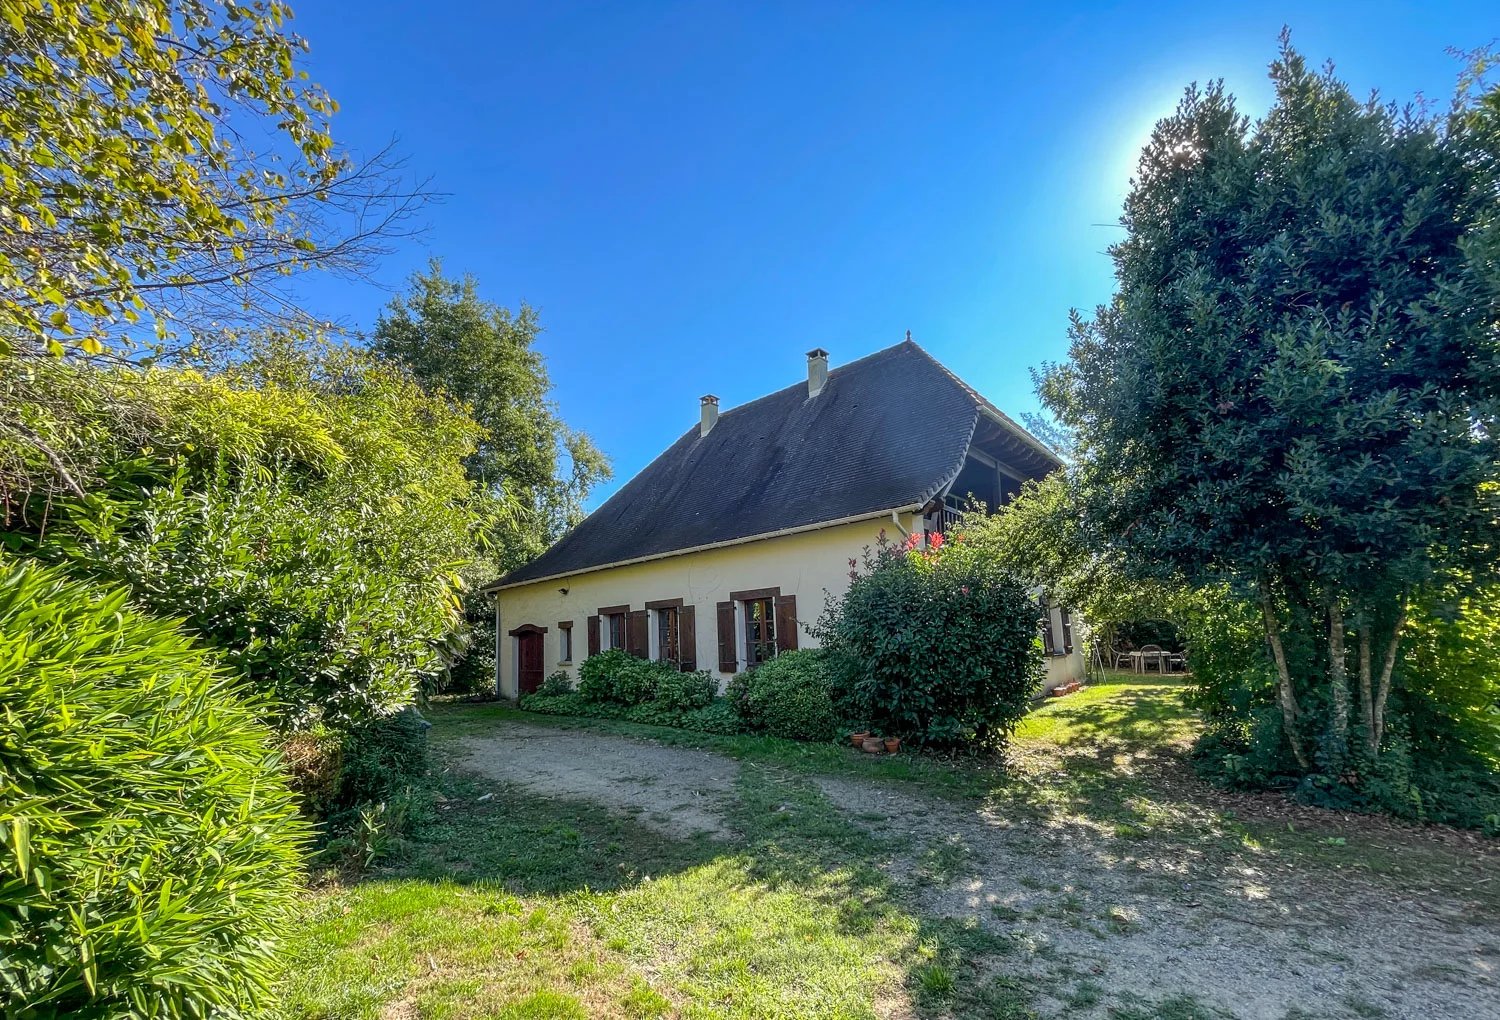 Detached house in peaceful surroundings - close to a village with good amenities.